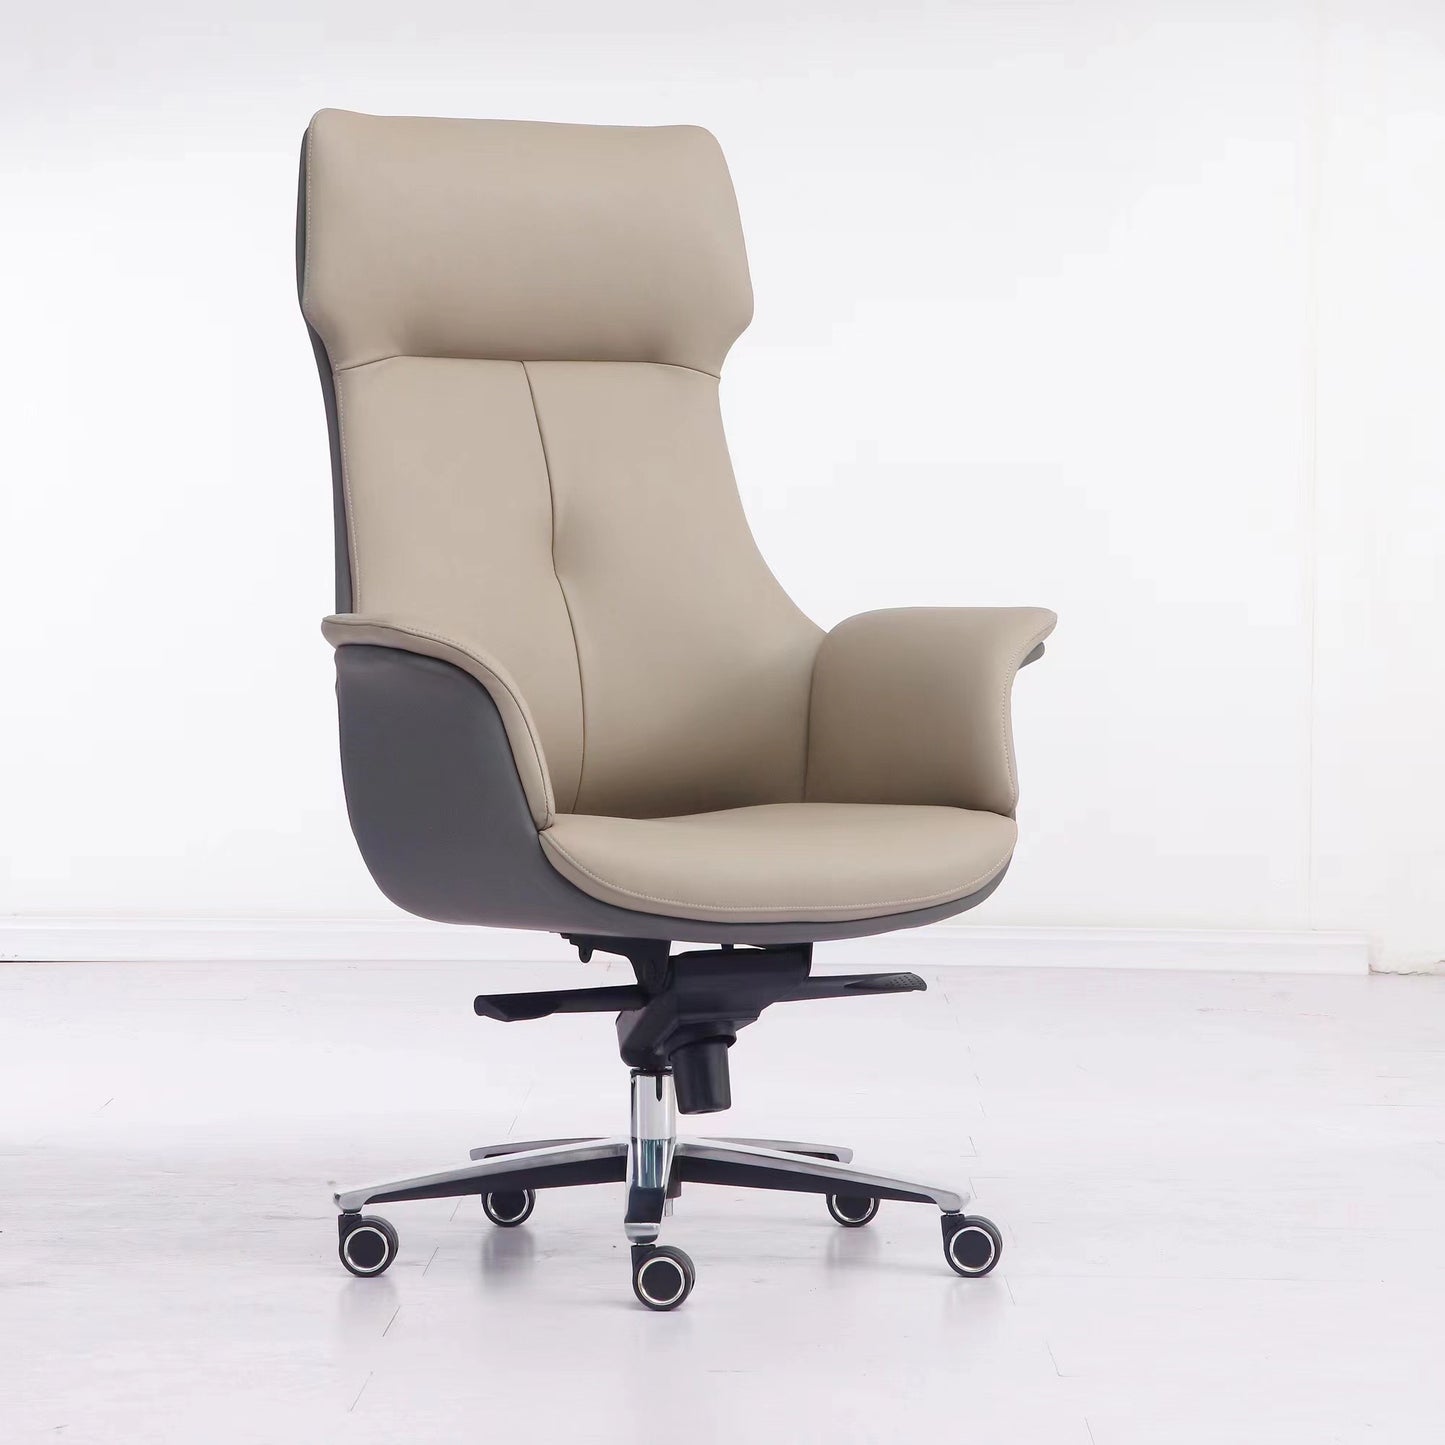 #C334A Genuine Leather High Back Office Chair, avaliable in 2 colors